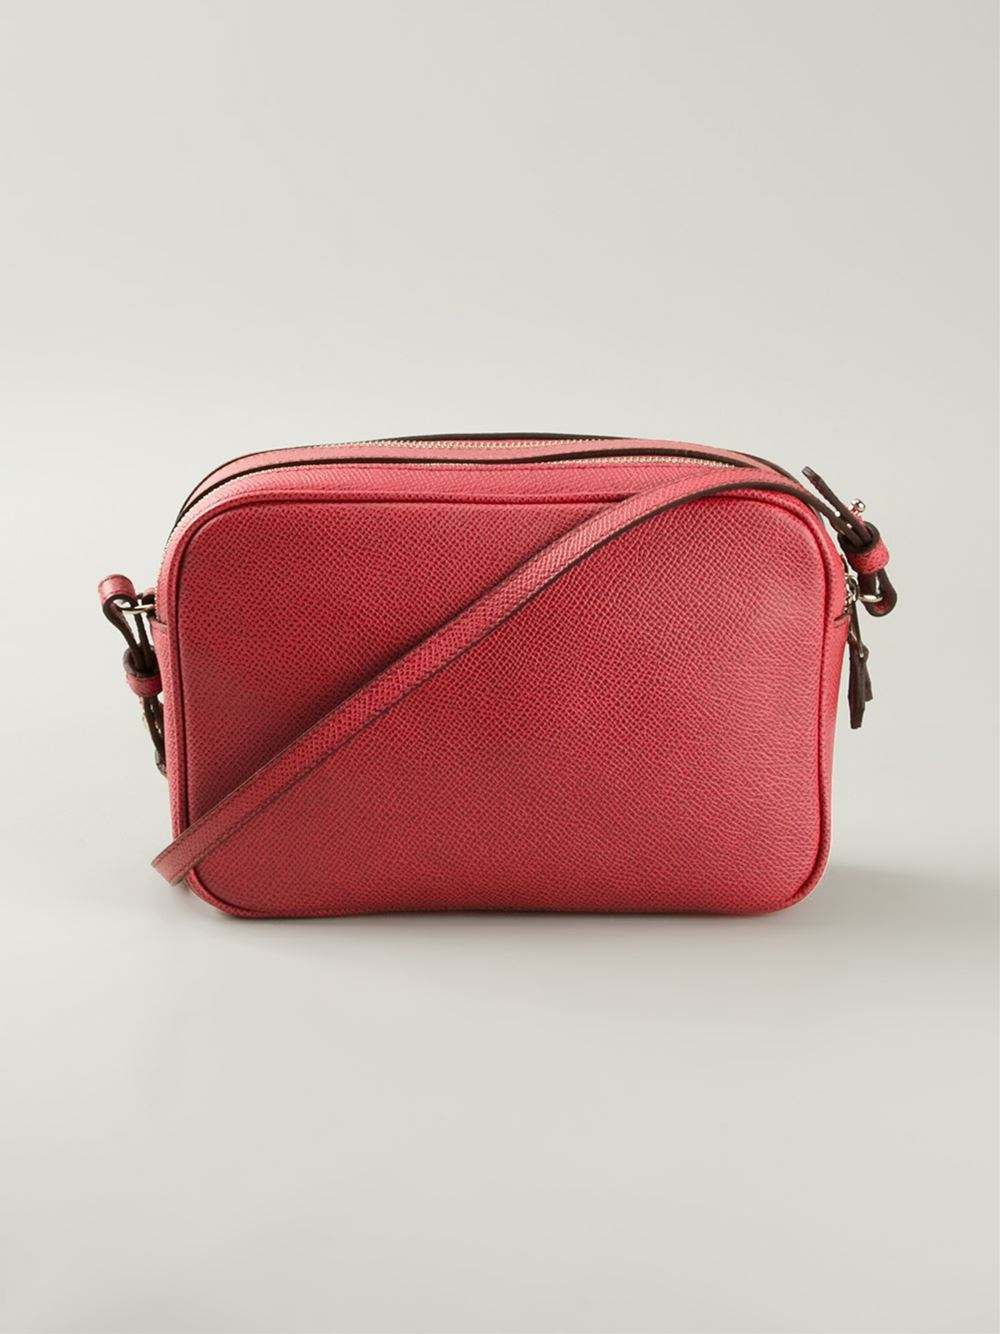 Giorgio Armani Paneled Leather Cross-Body Bag in Red | Lyst